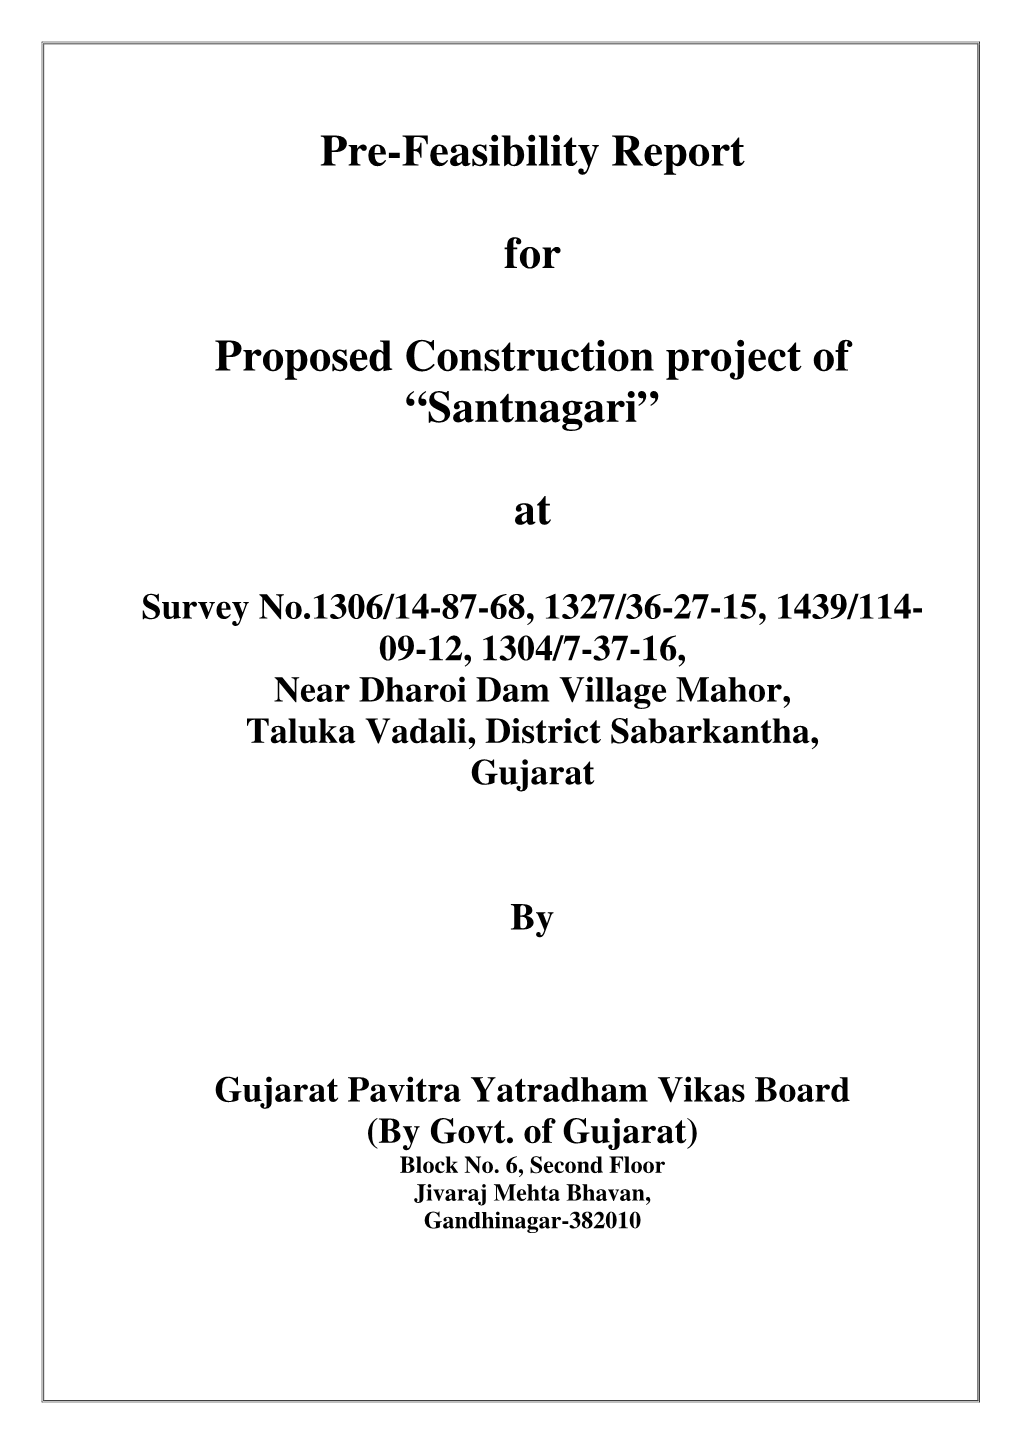 Pre-Feasibility Report for Proposed Construction Project of “Santnagari” At